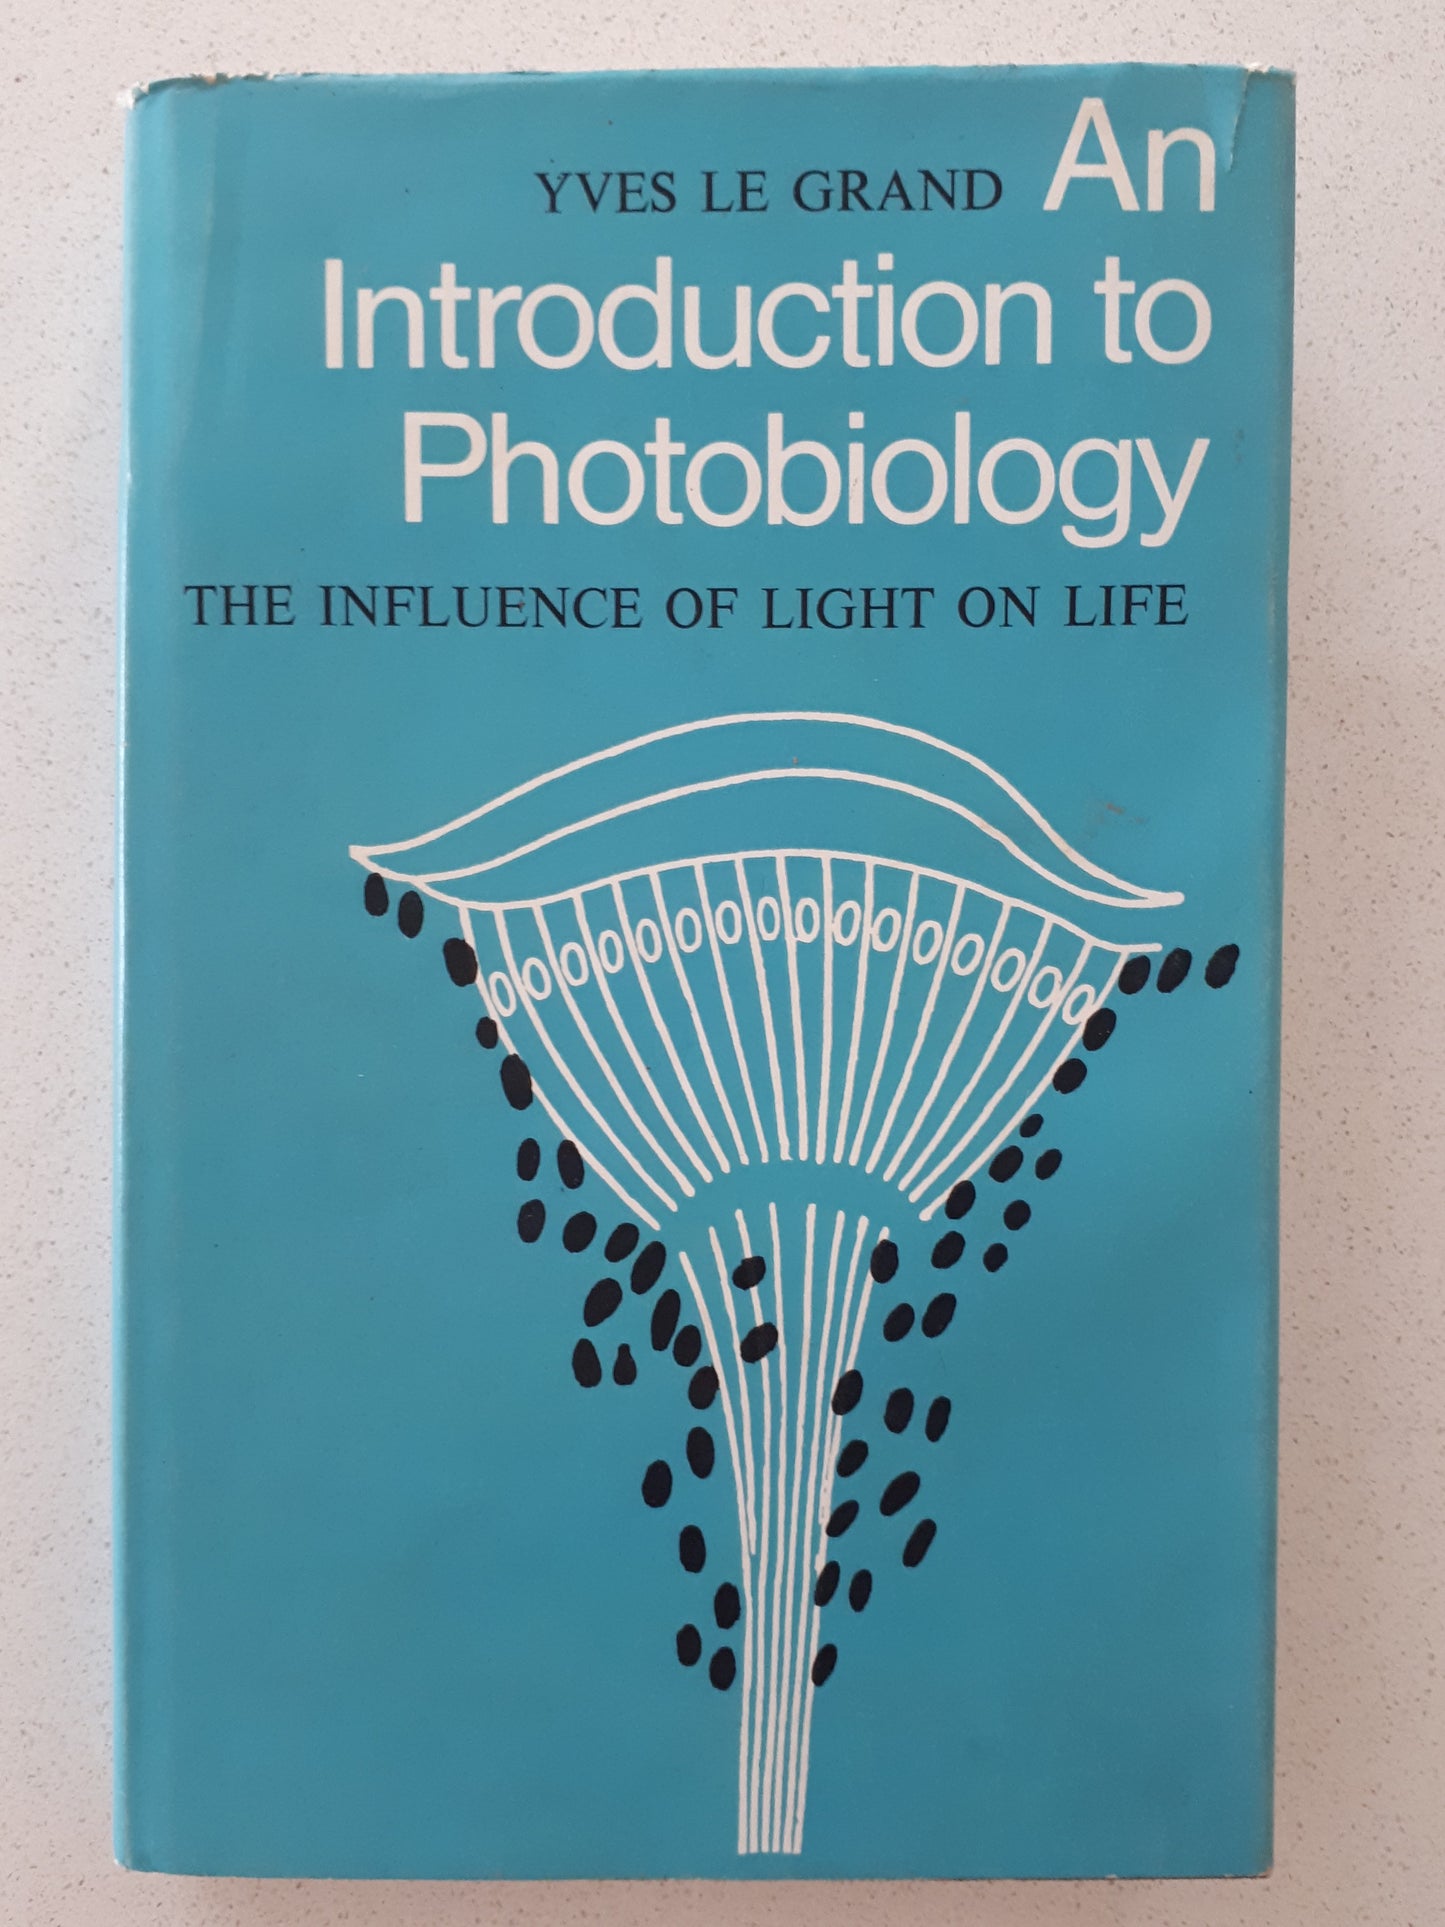 An Introduction to Photobiology by Yves Le Grand